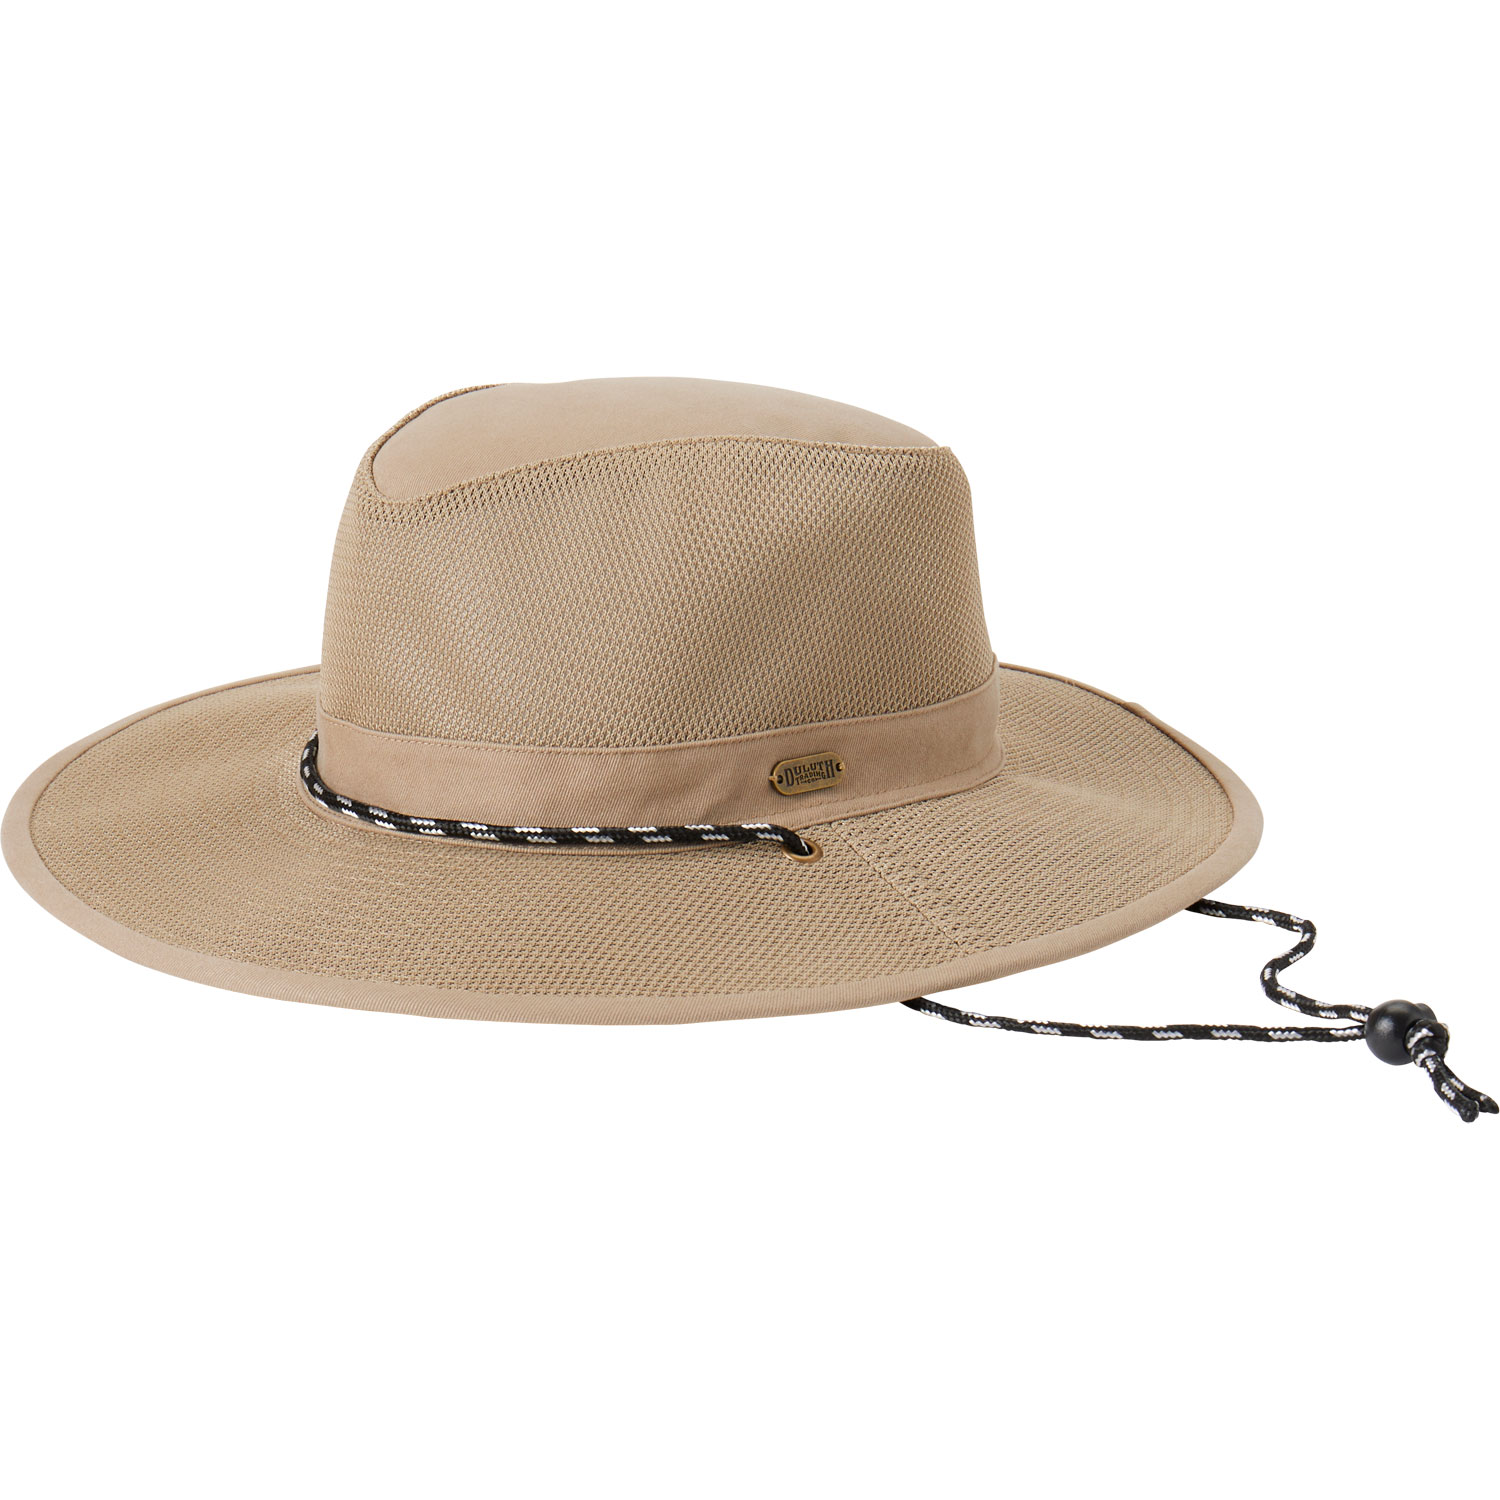 Men's Crusher Hat  Duluth Trading Company